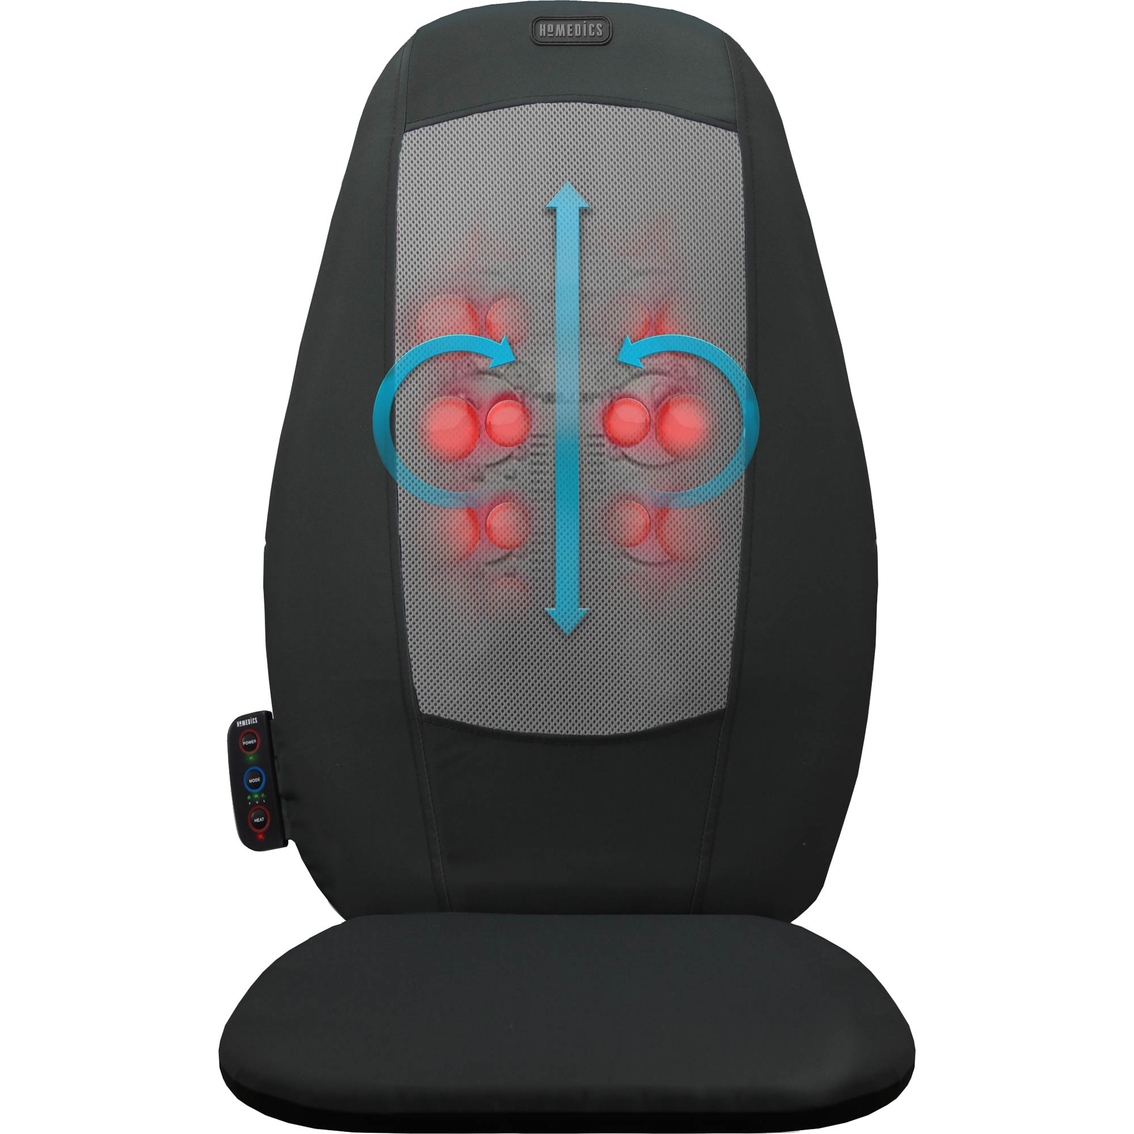 Best Homedics Heated Back Massager for sale in Lakewood, Ohio for 2023